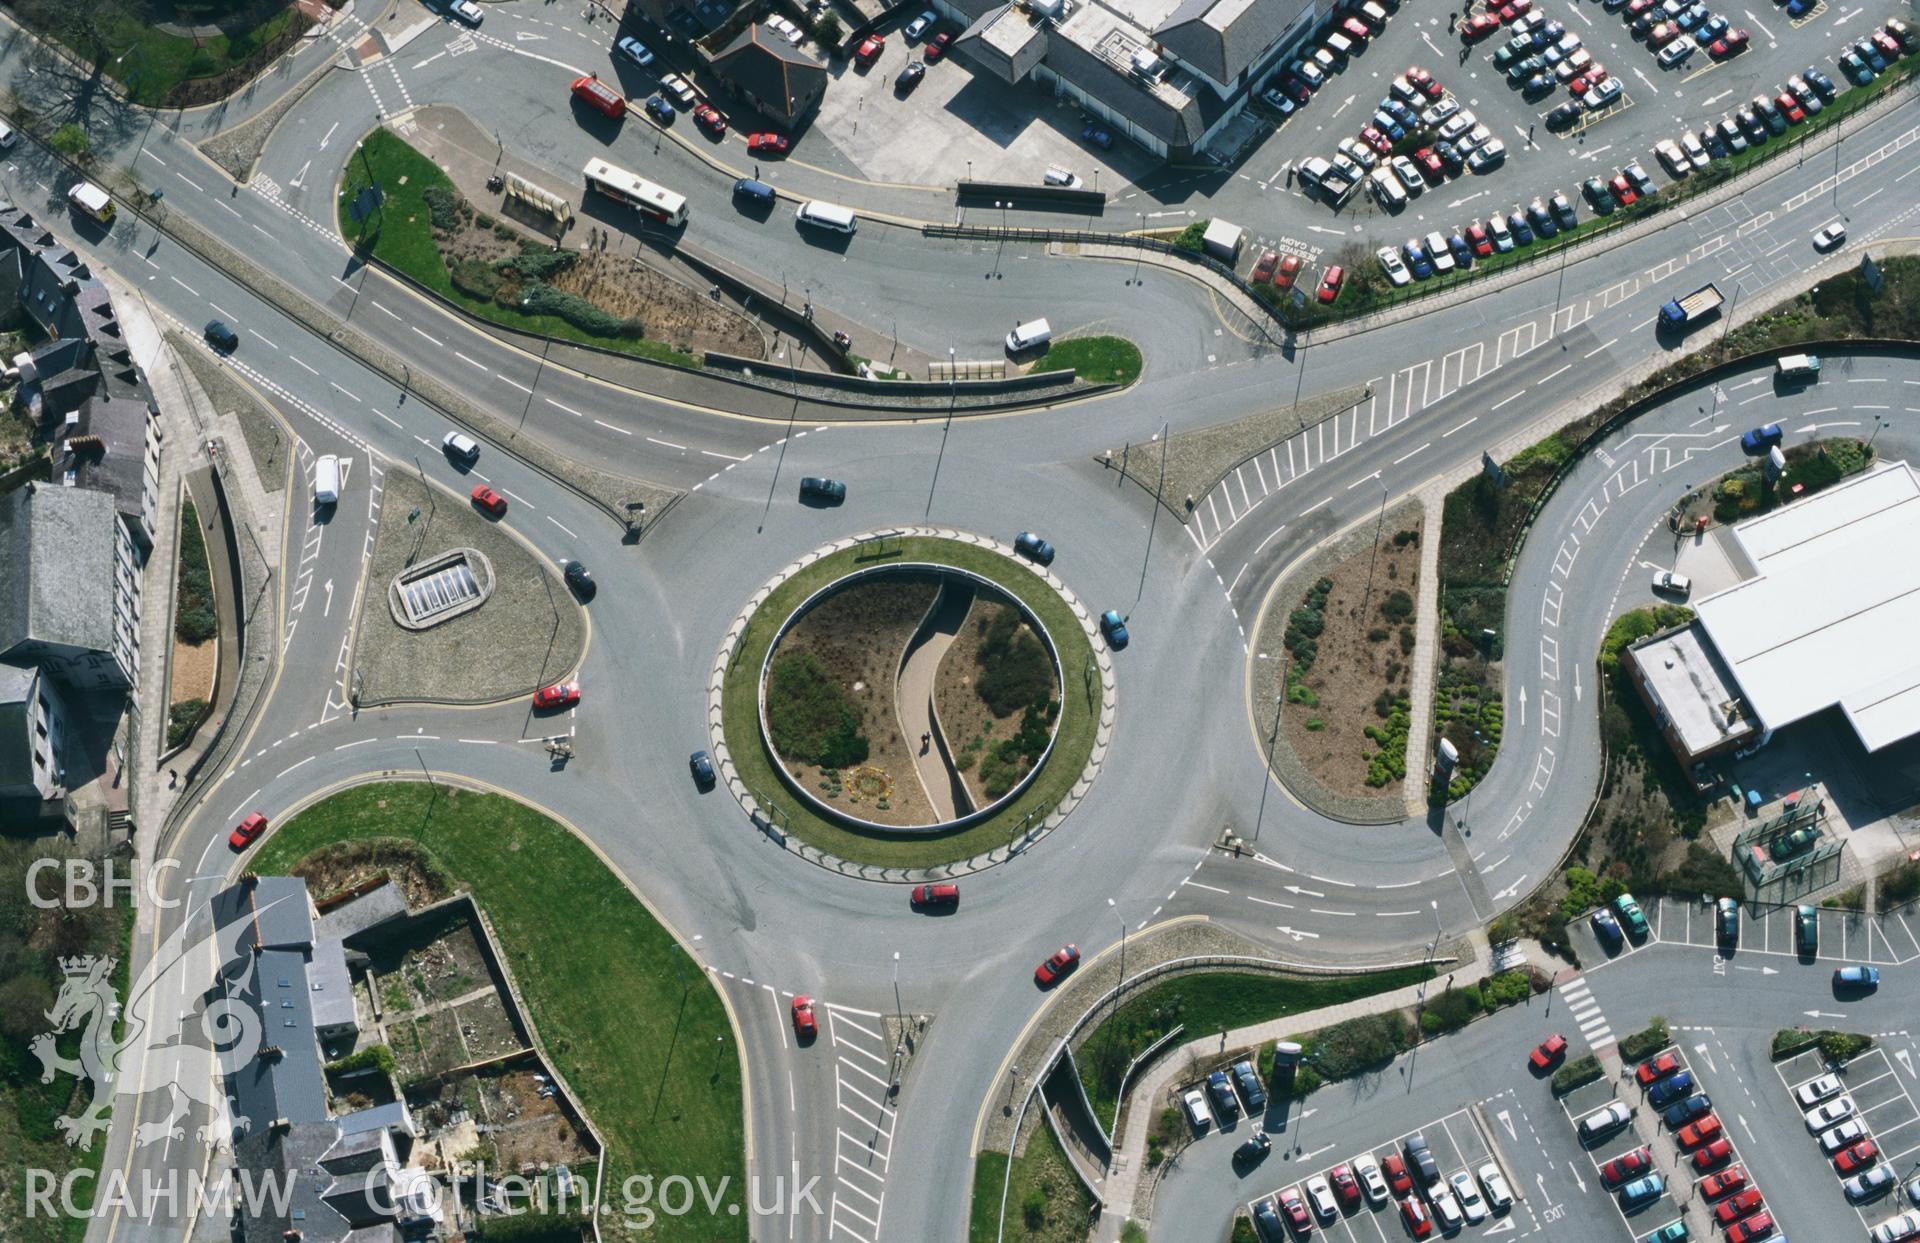 RCAHMW colour oblique aerial photograph of Haverfordwest, roundabout in town, modern feature. Taken by Toby Driver on 10/04/2003